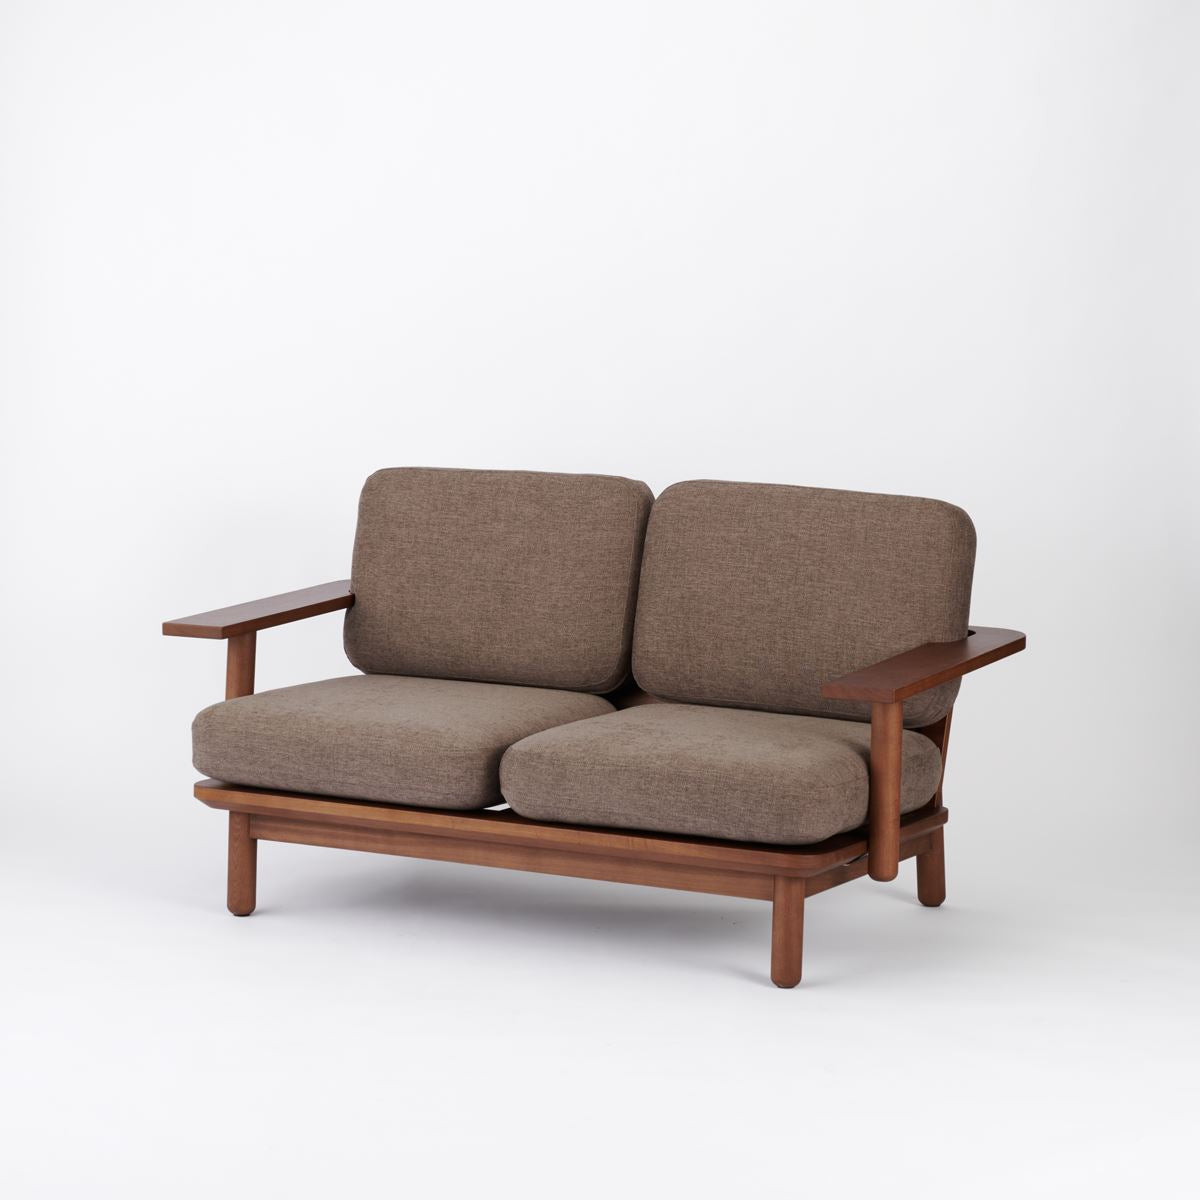 KUUM  Sofa 2 seater Double arm - Wooden Frame/Brown / クーム ソファ